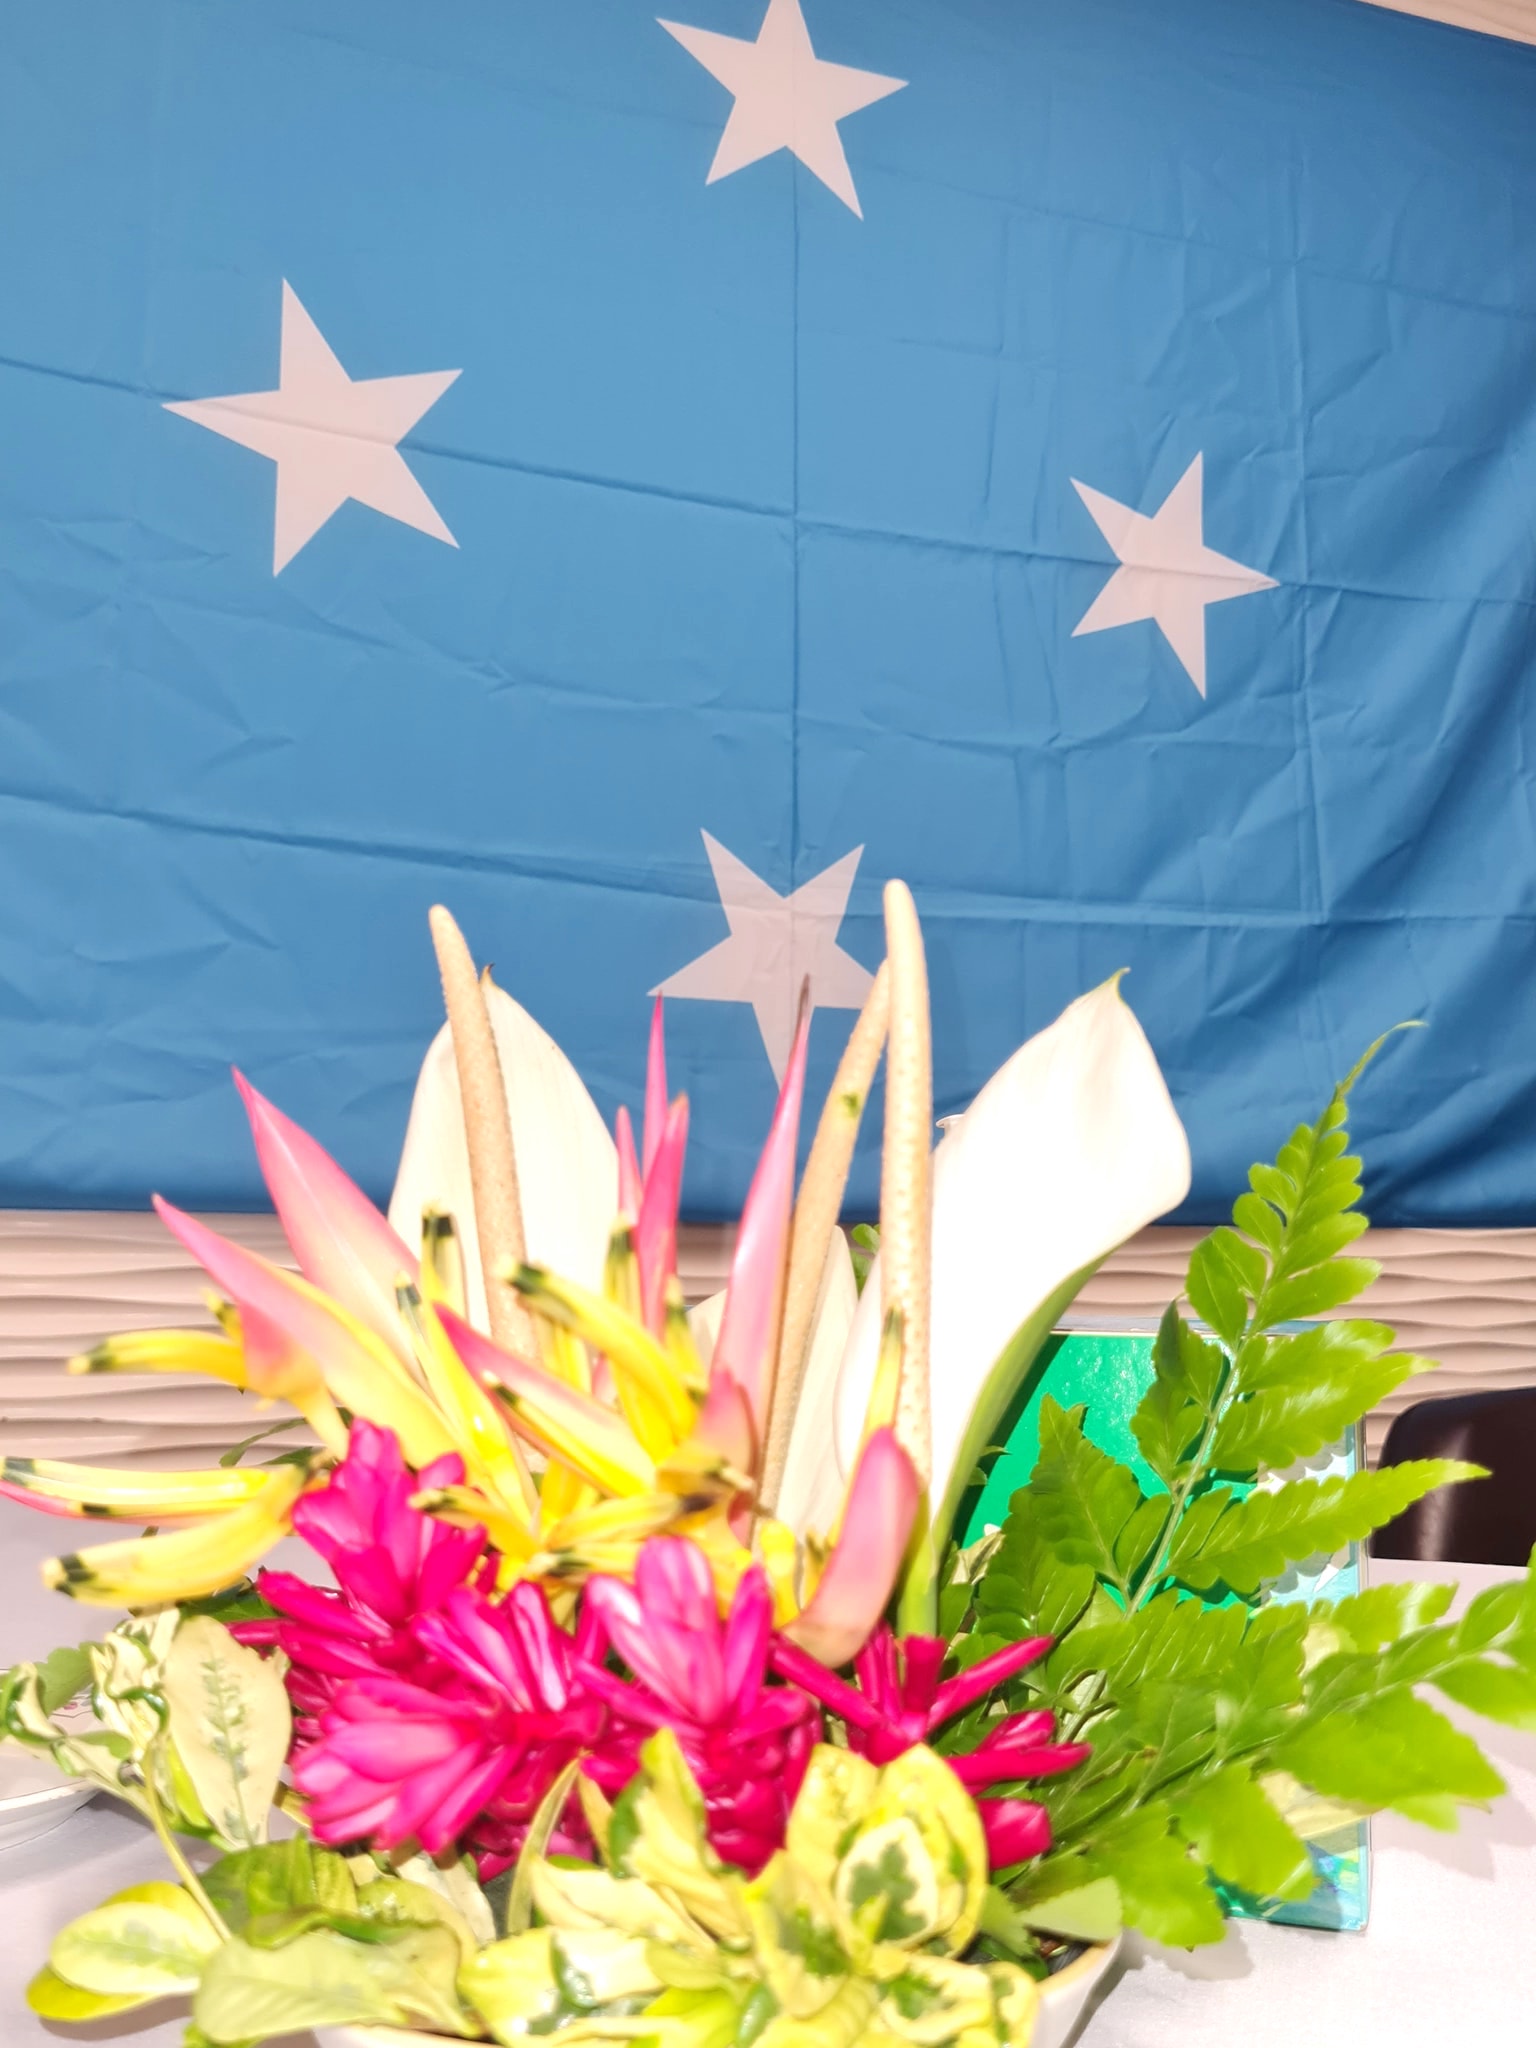 National Election Changes 2 in Pohnpei and Maintains All State Representatives 